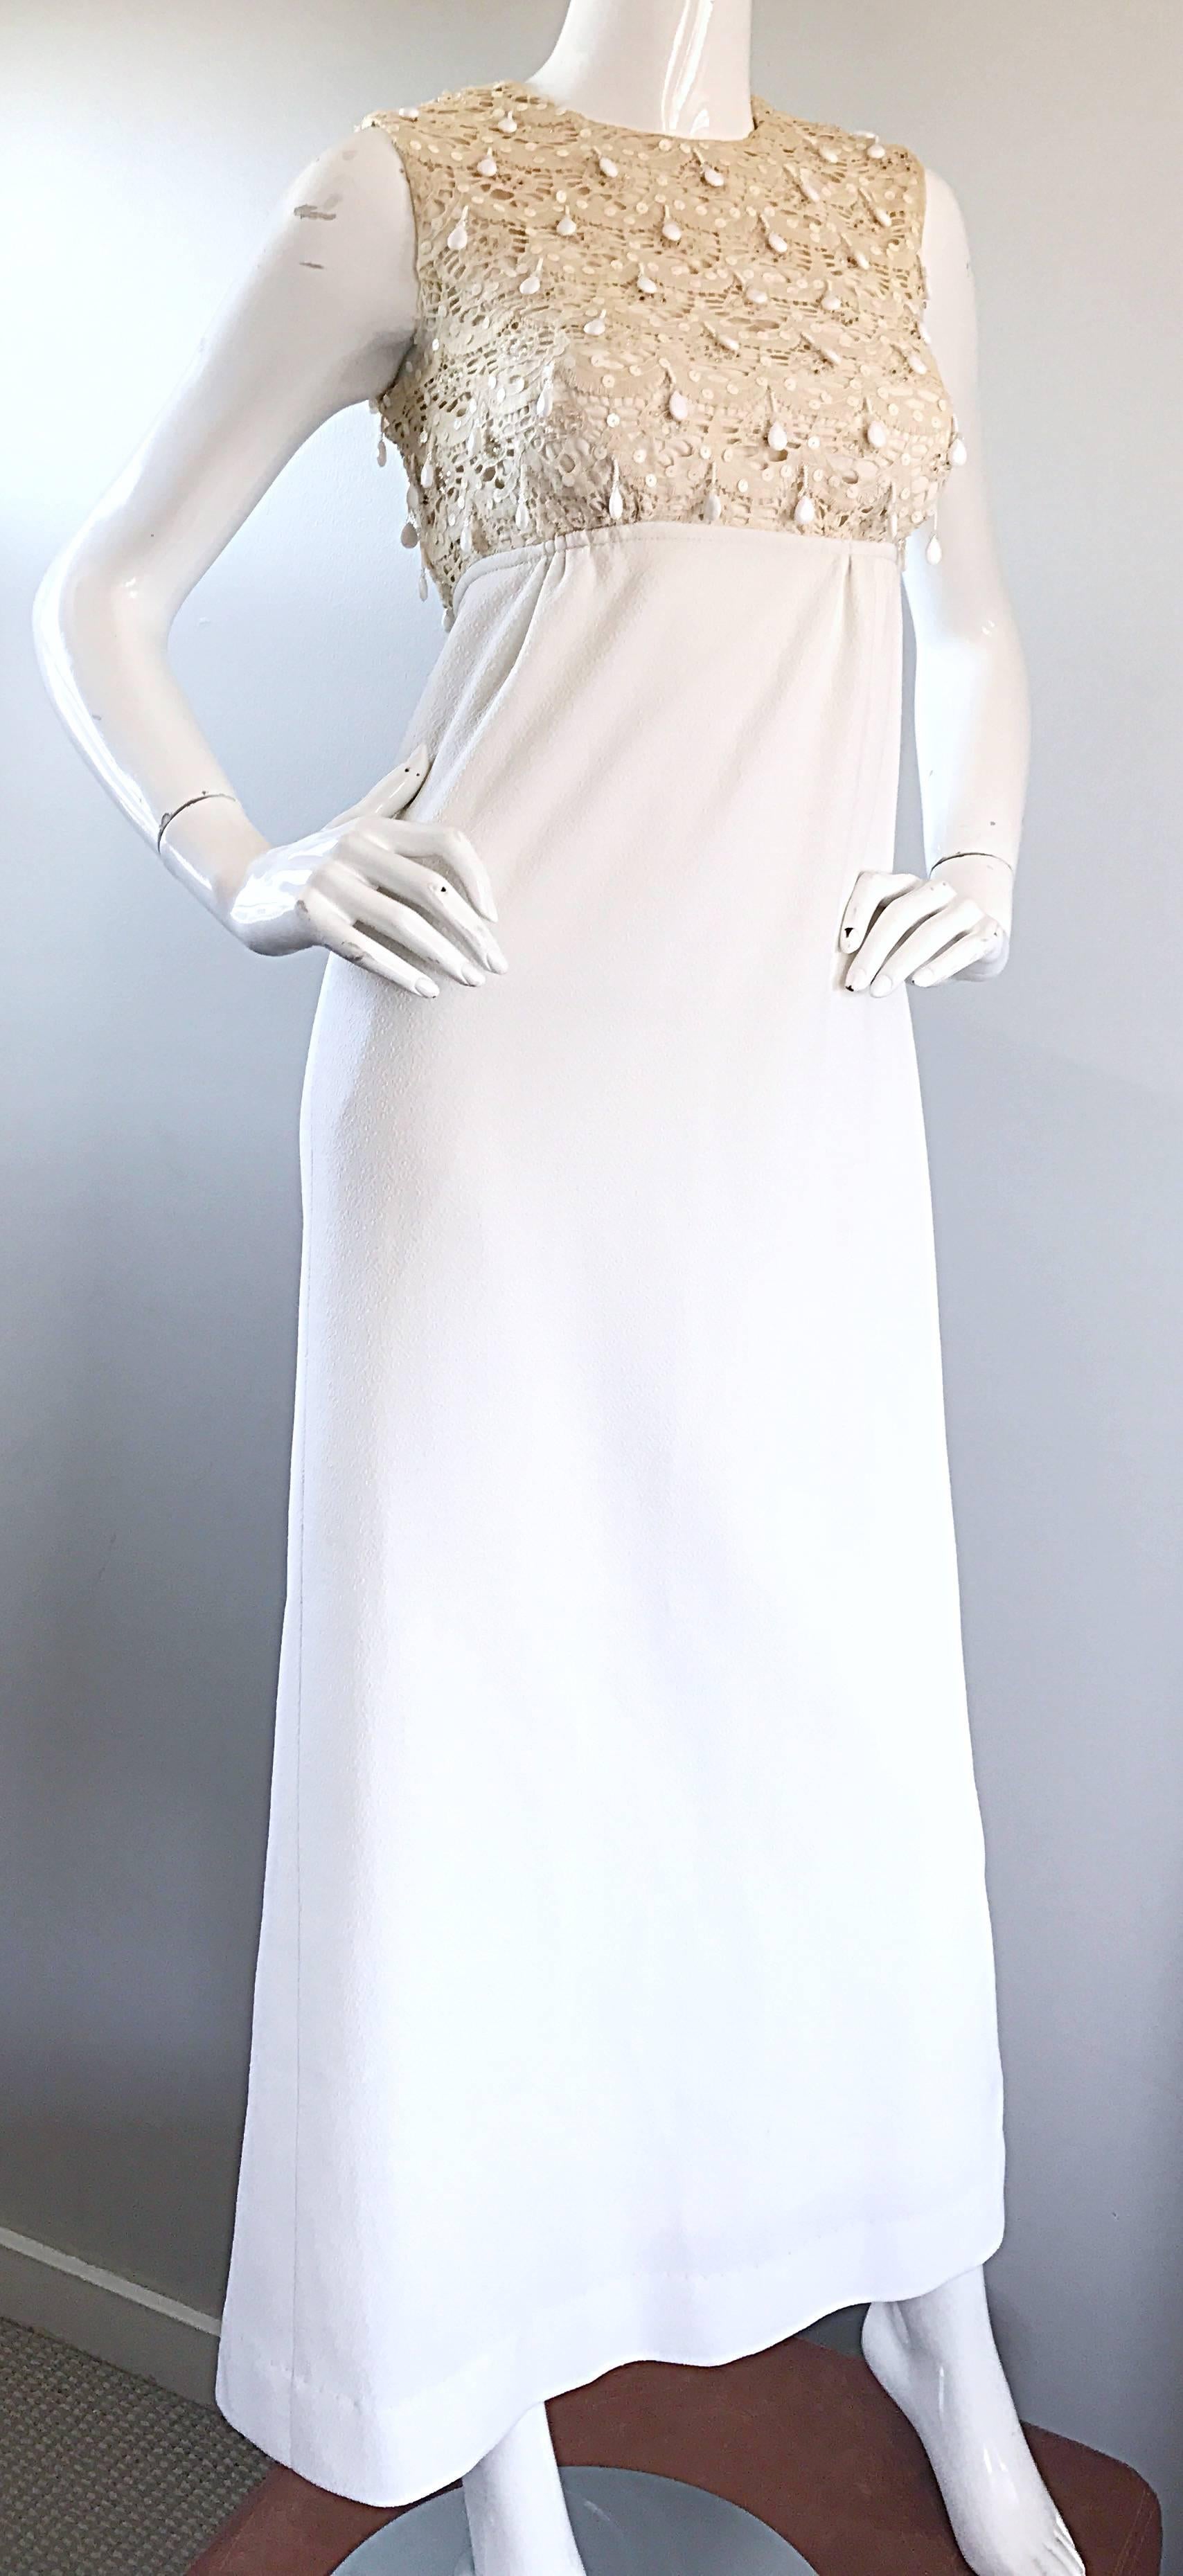 Gorgeous vintage 60s JACKY BRYAN ivory and white full length dress. Features a hand crochet lace bodice, which is adorned with hundreds of dangling white beads on the front and back. Chic full length white skirt. Full metal zipper up th eback with